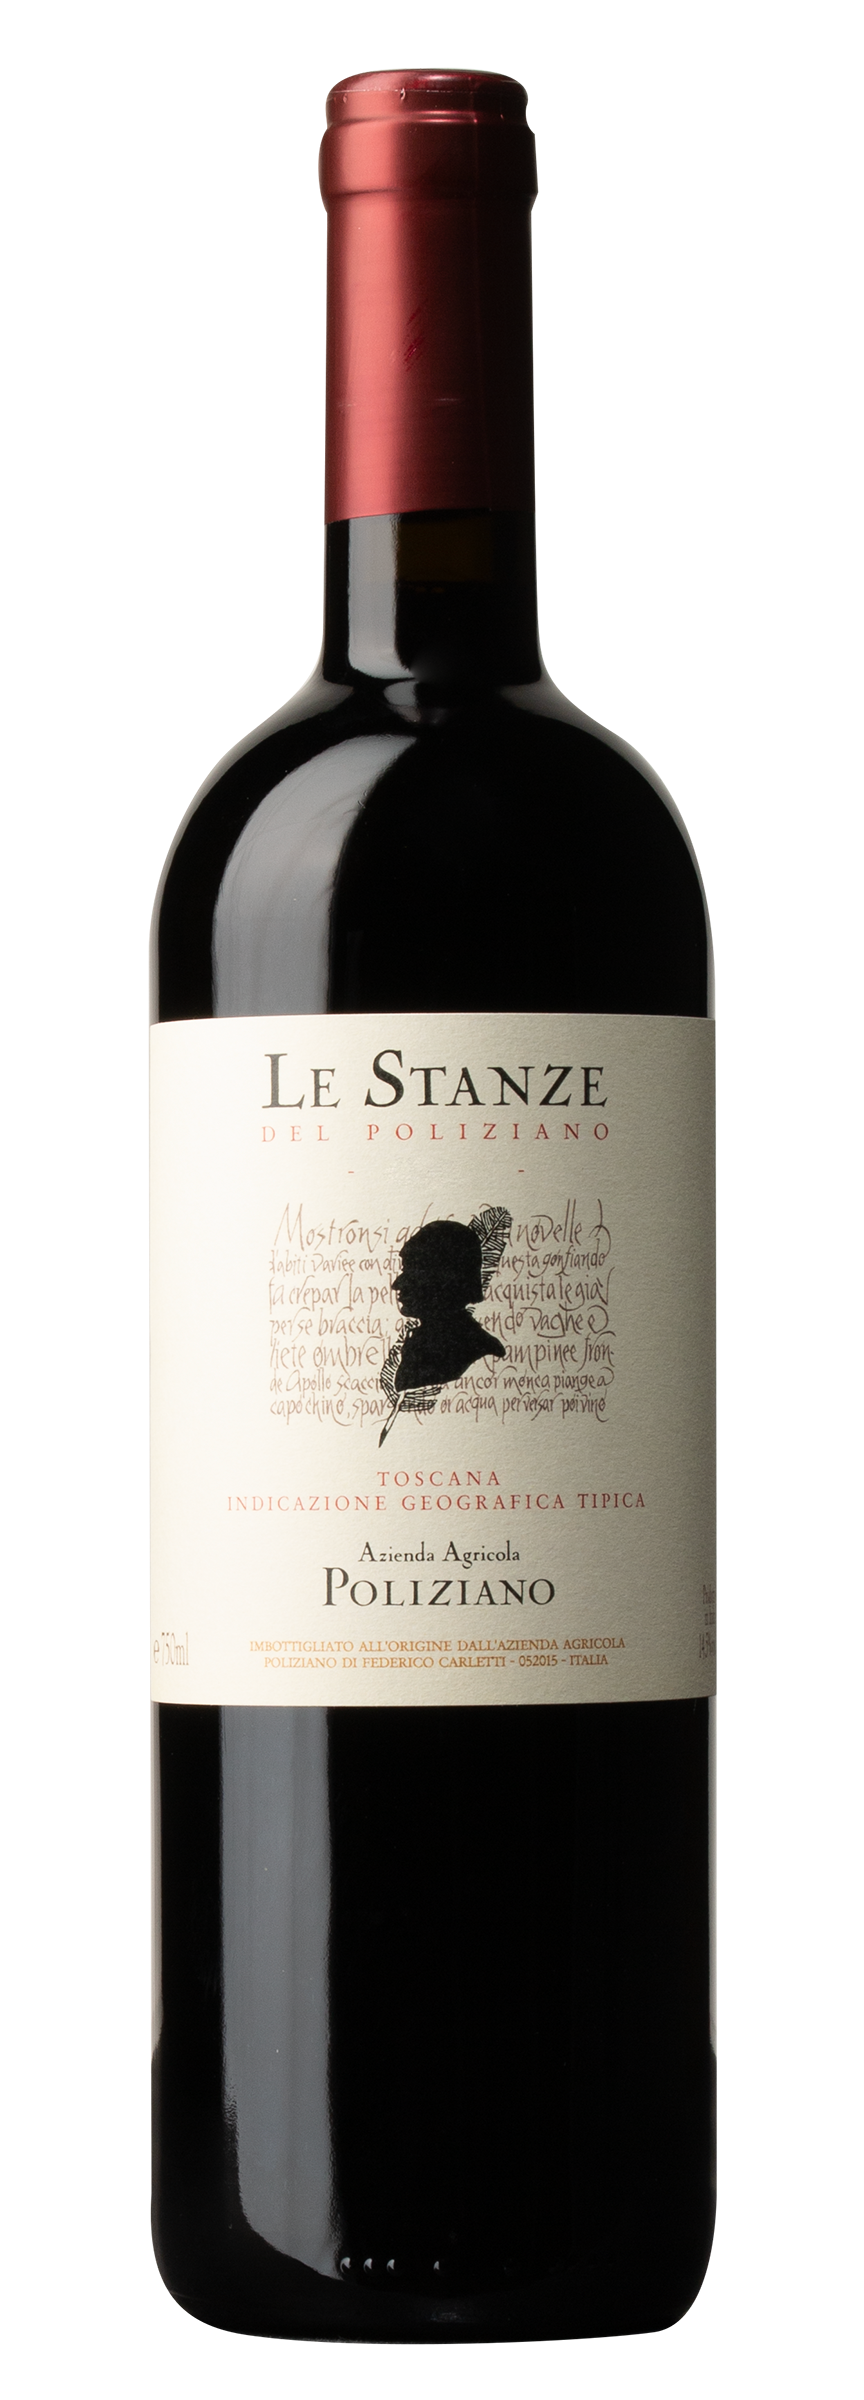 „Le Stanze“ IGT Toscana, rosso